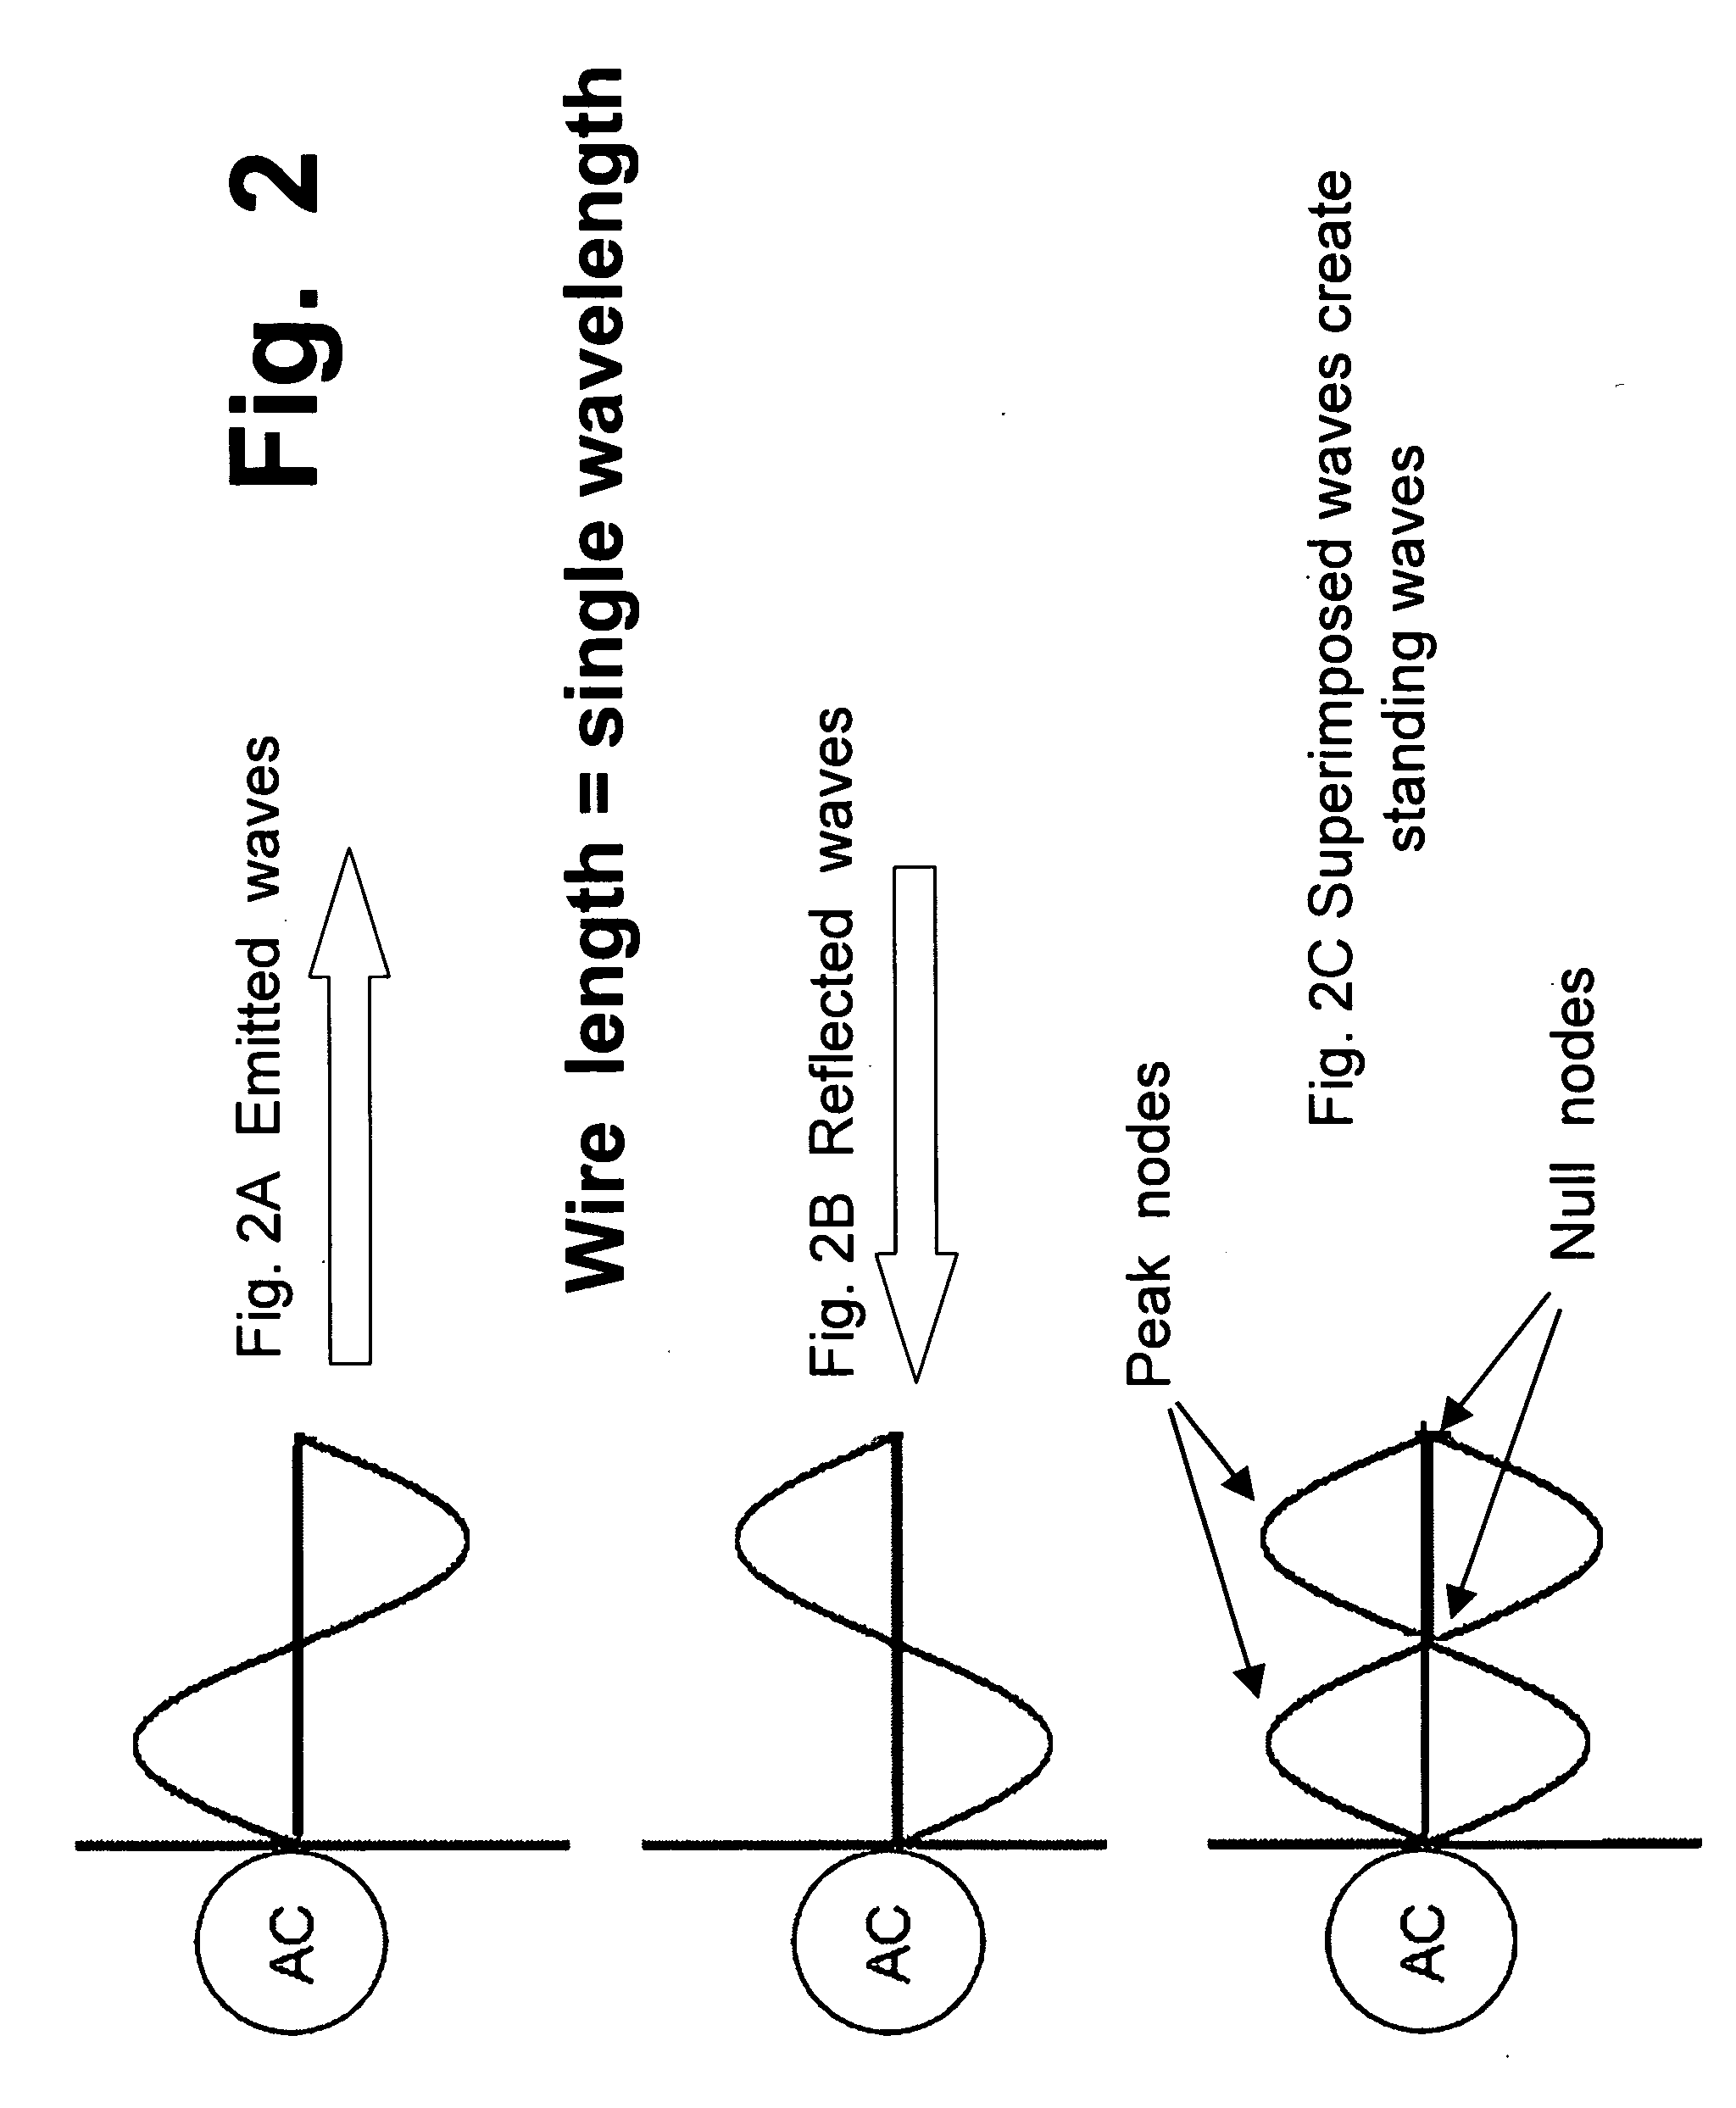 Electromagnetic systems with double-resonant spiral coil components